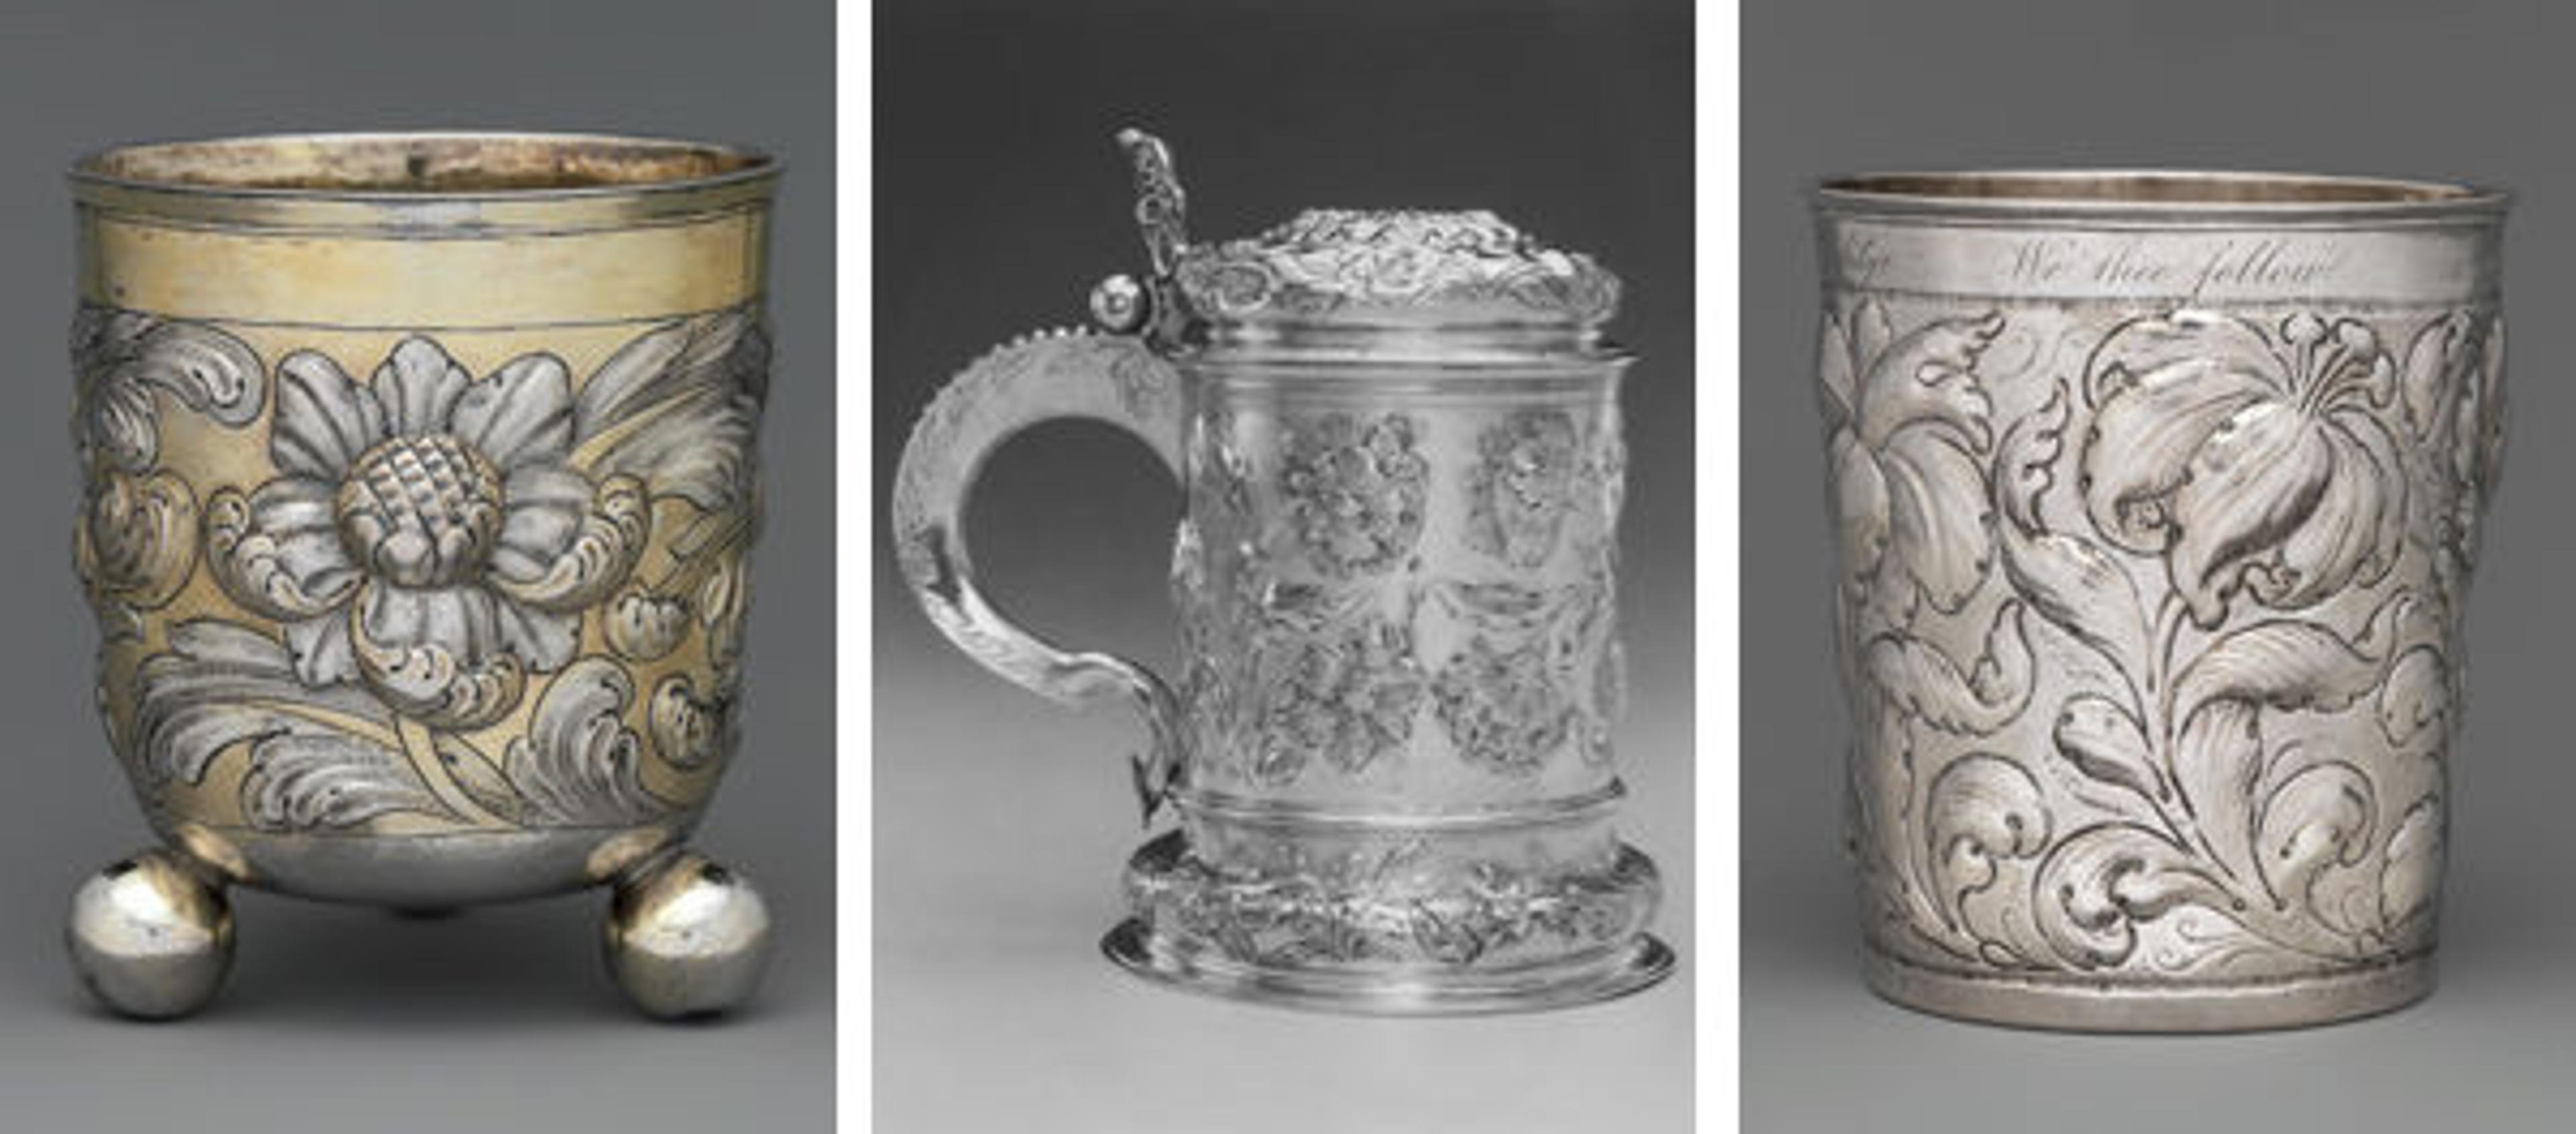 Left to right: Beaker, late 17th century. Hungarian, Rimaszombat. Silver, partly gilded; Overall: 4 1/2 x 4 in. (11.5 x 10.1 cm). The Metropolitan Museum of Art, New York, Gift of The Salgo Trust for Education, New York, in memory of Nicolas M. Salgo, 2010 (2010.110.50). Hanss Lambrecht III (German, active 1630–70). Tankard, ca. 1660. German, Hamburg. Silver, partly gilded; Height: 8 5/8 in. (21.9 cm). The Metropolitan Museum of Art, New York, The Collection of Giovanni P. Morosini, presented by his daughter Giulia, 1932 (32.75.83). Beaker, second half 17th century. Possibly Norwegian. Silver; Height: 3 5/8 in. (9.2 cm); Diameter: 3 1/4 in. (8.3 cm). The Metropolitan Museum of Art, New York, Rogers Fund, 1913 (13.42.18)